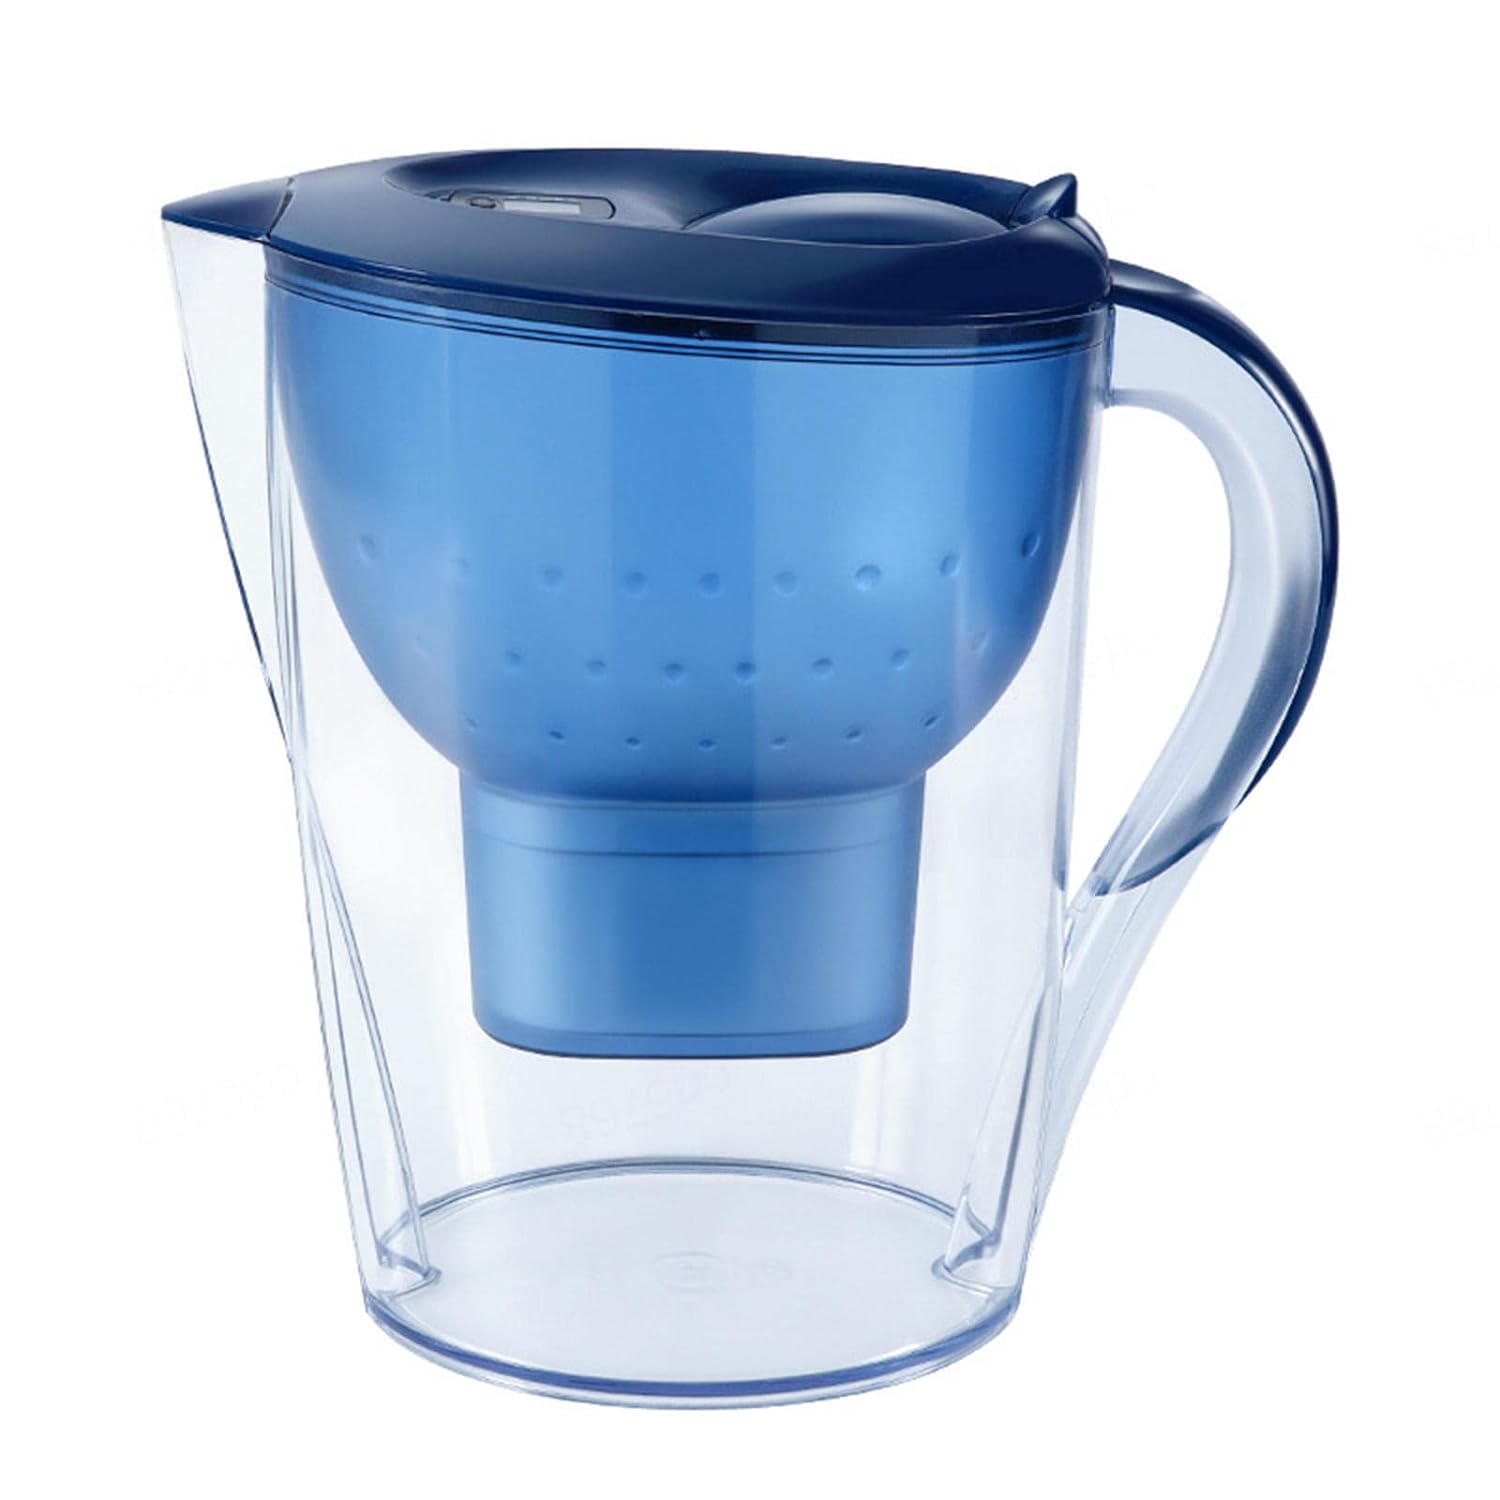 Water Filter Jugs and Pitchers